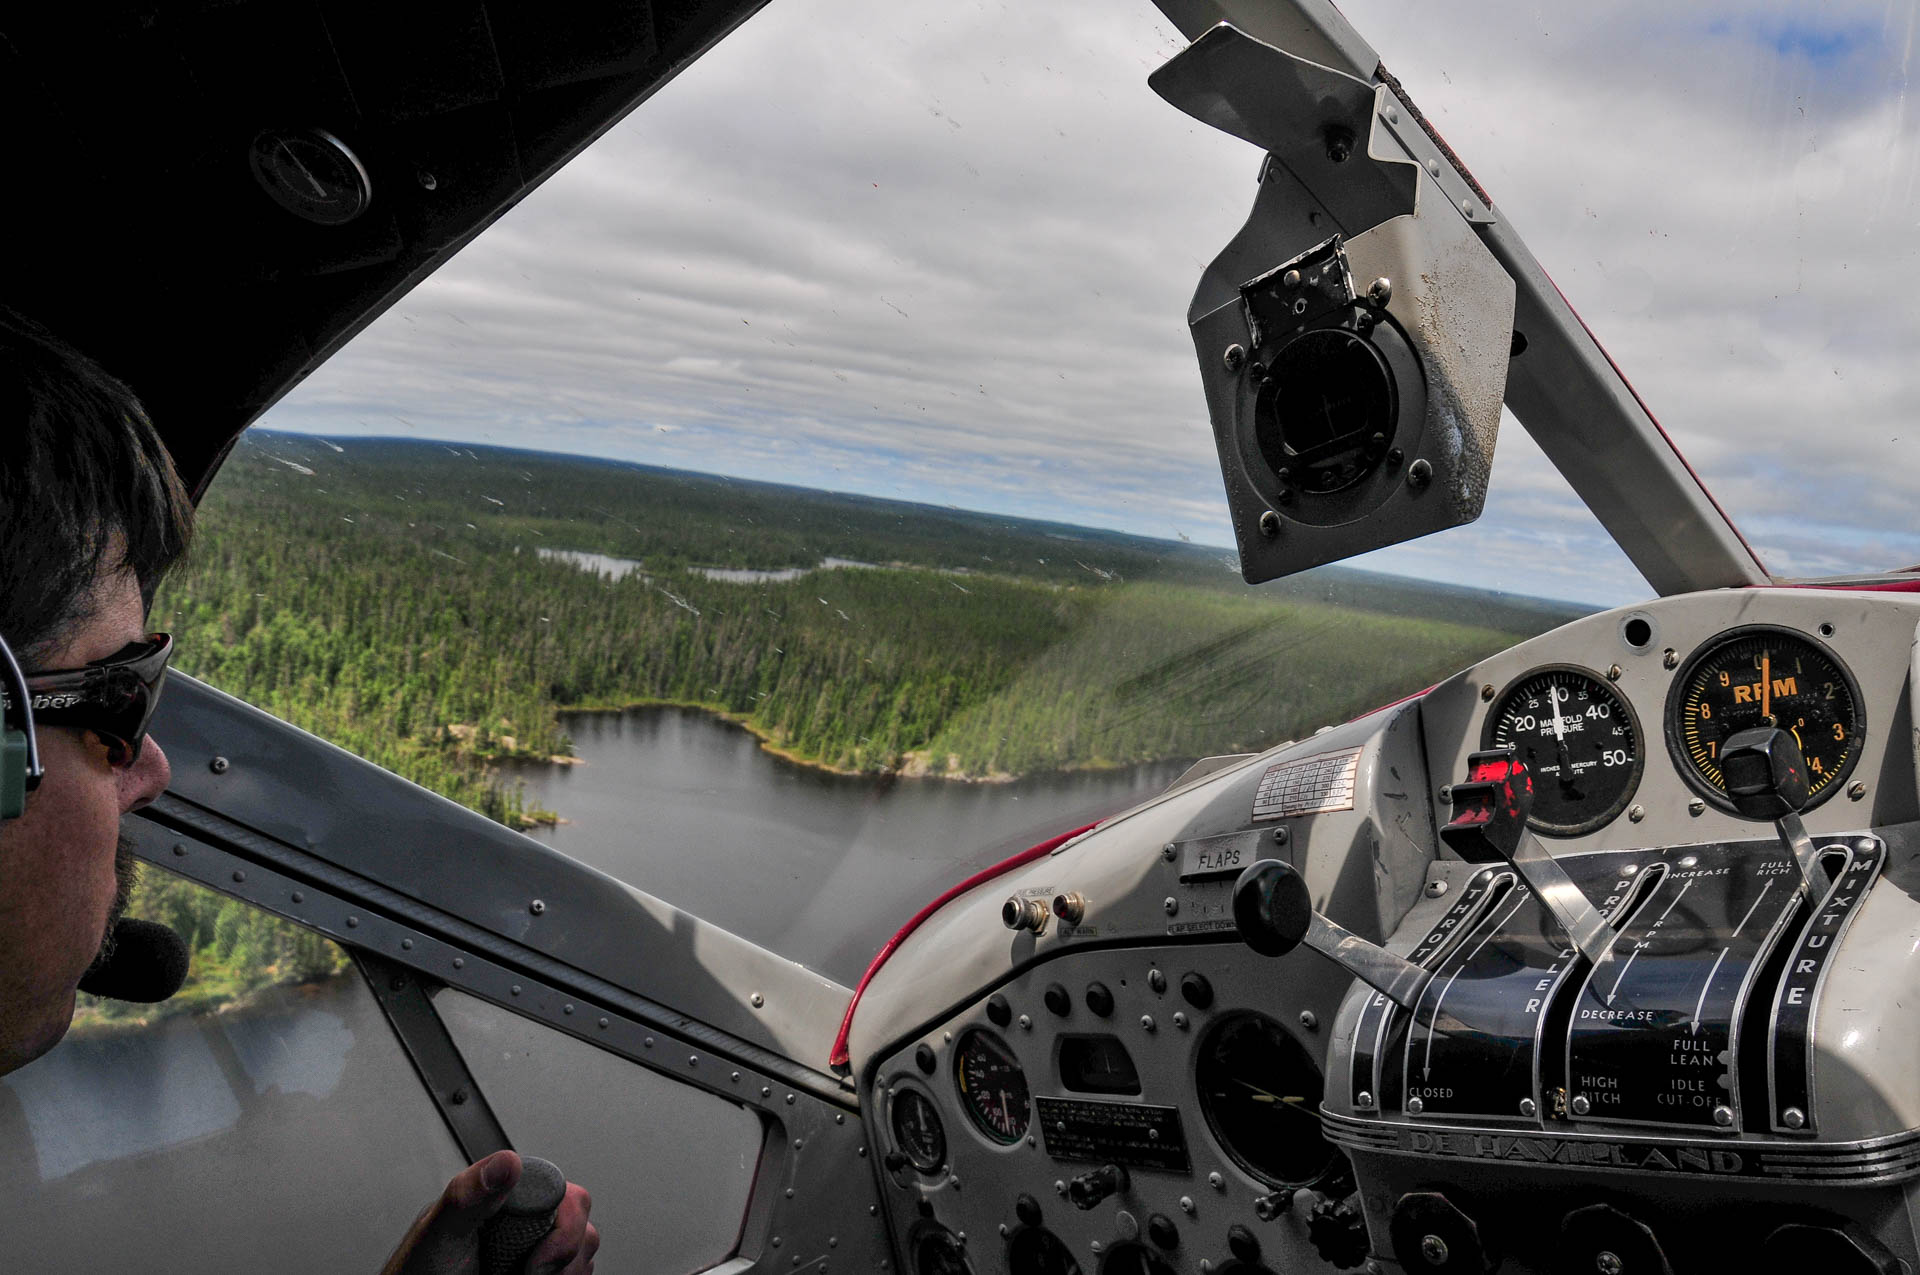 Flying over Wabakimi towards the outfitters